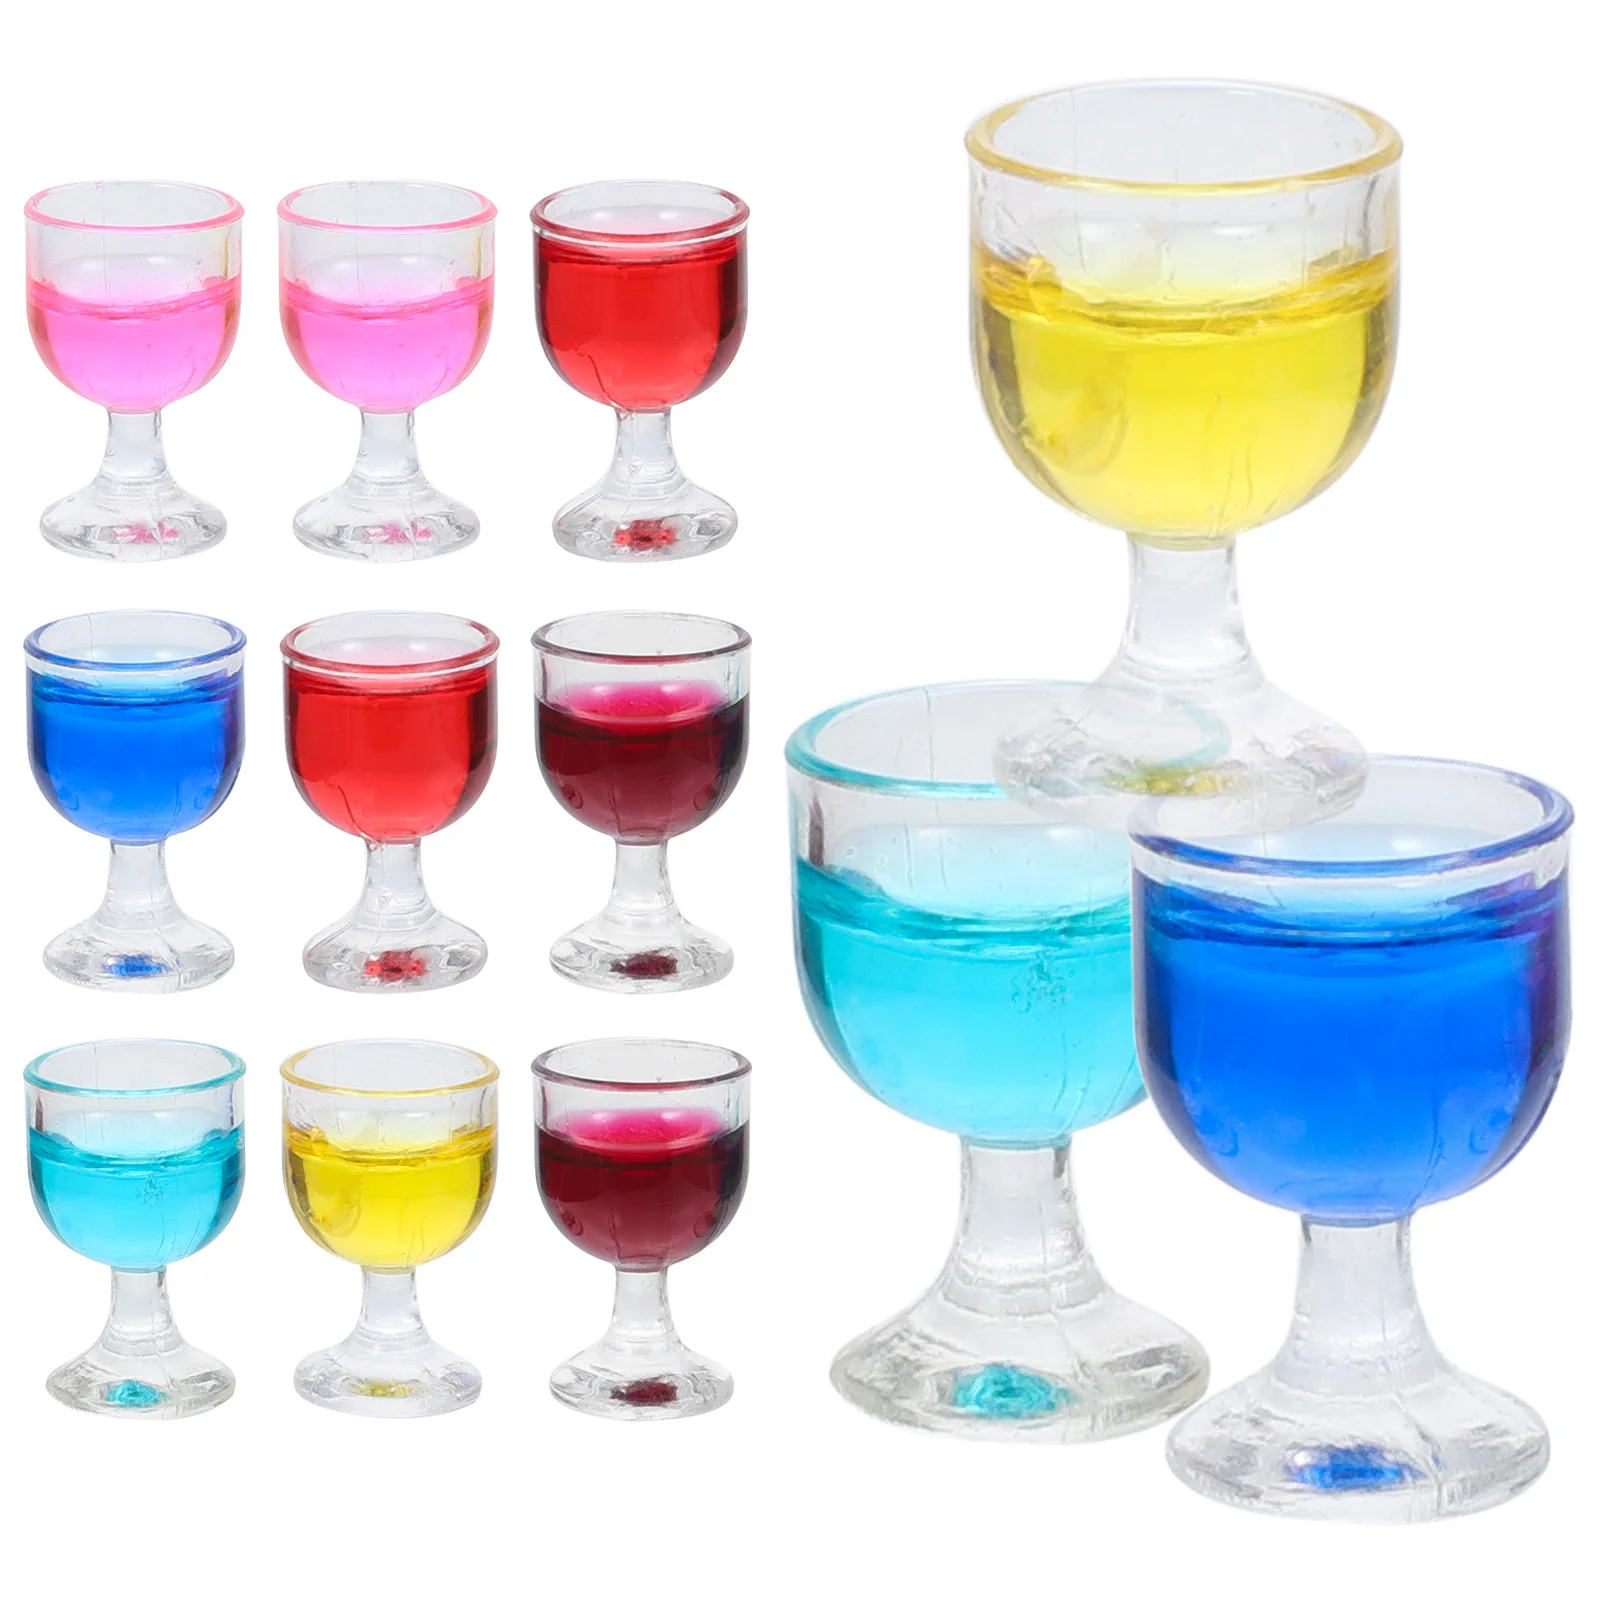 

1 Set 12pcs House Cocktail Cup Tiny Simulation Resin Drinking Water Cup Photo Prop 1 12 Scale Beer Glasses for Children Kids